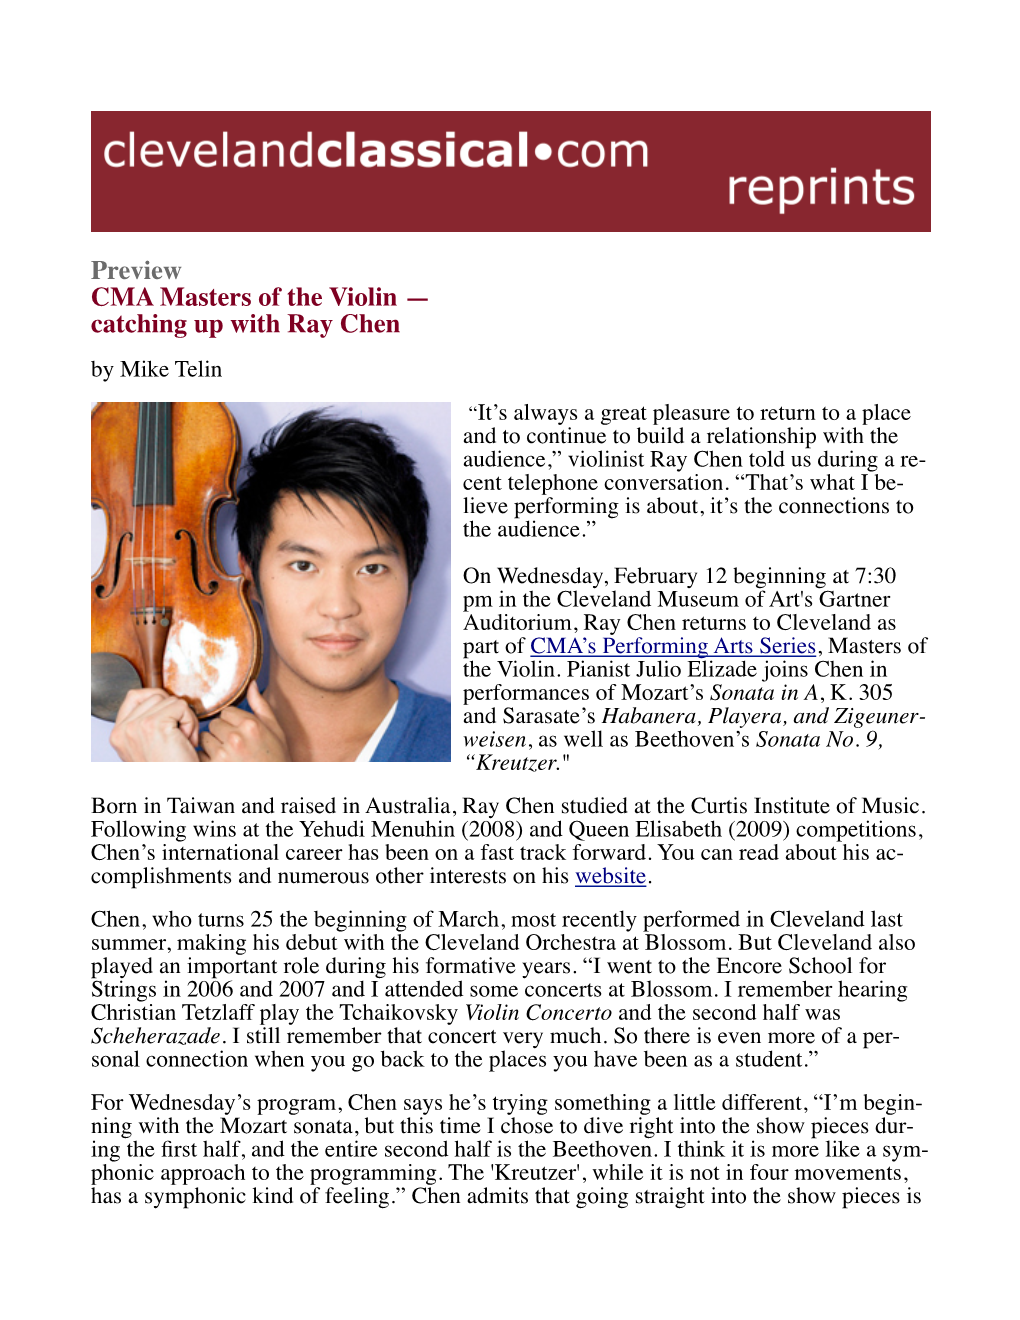 Preview CMA Masters of the Violin — Catching up with Ray Chen by Mike Telin